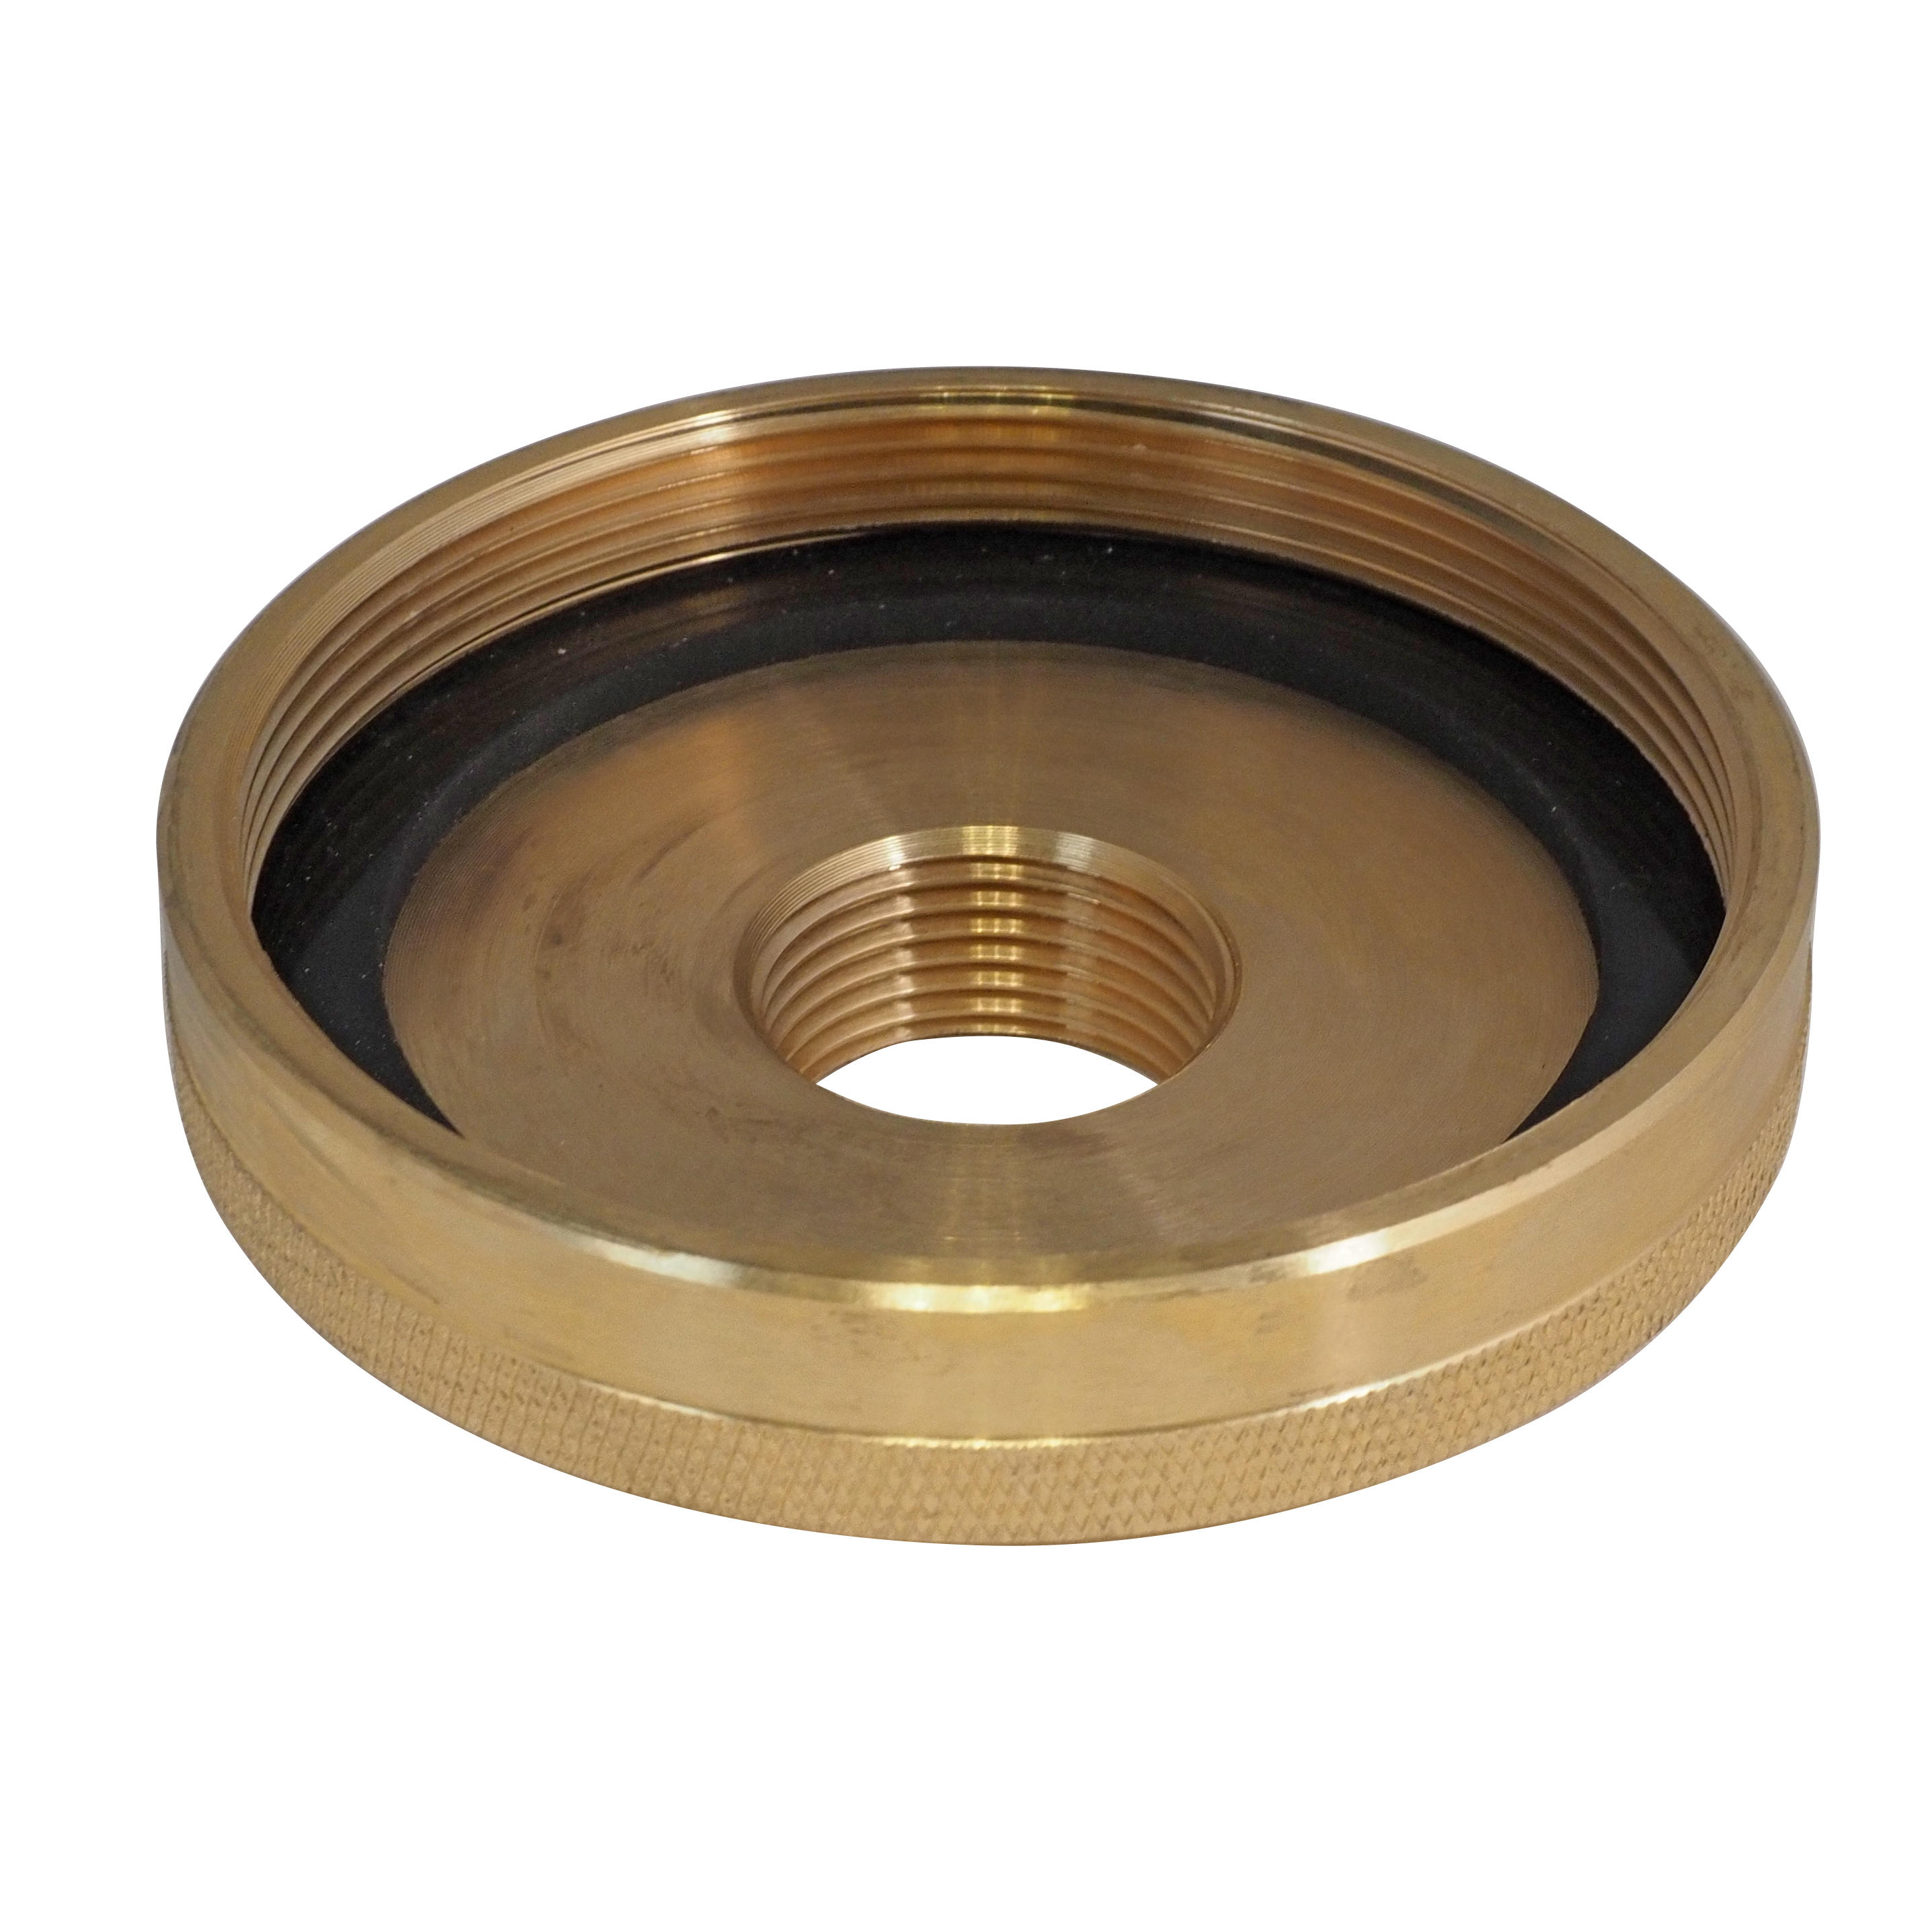 Adapter 1 inch IT to G 3 1/2 inch IT brass